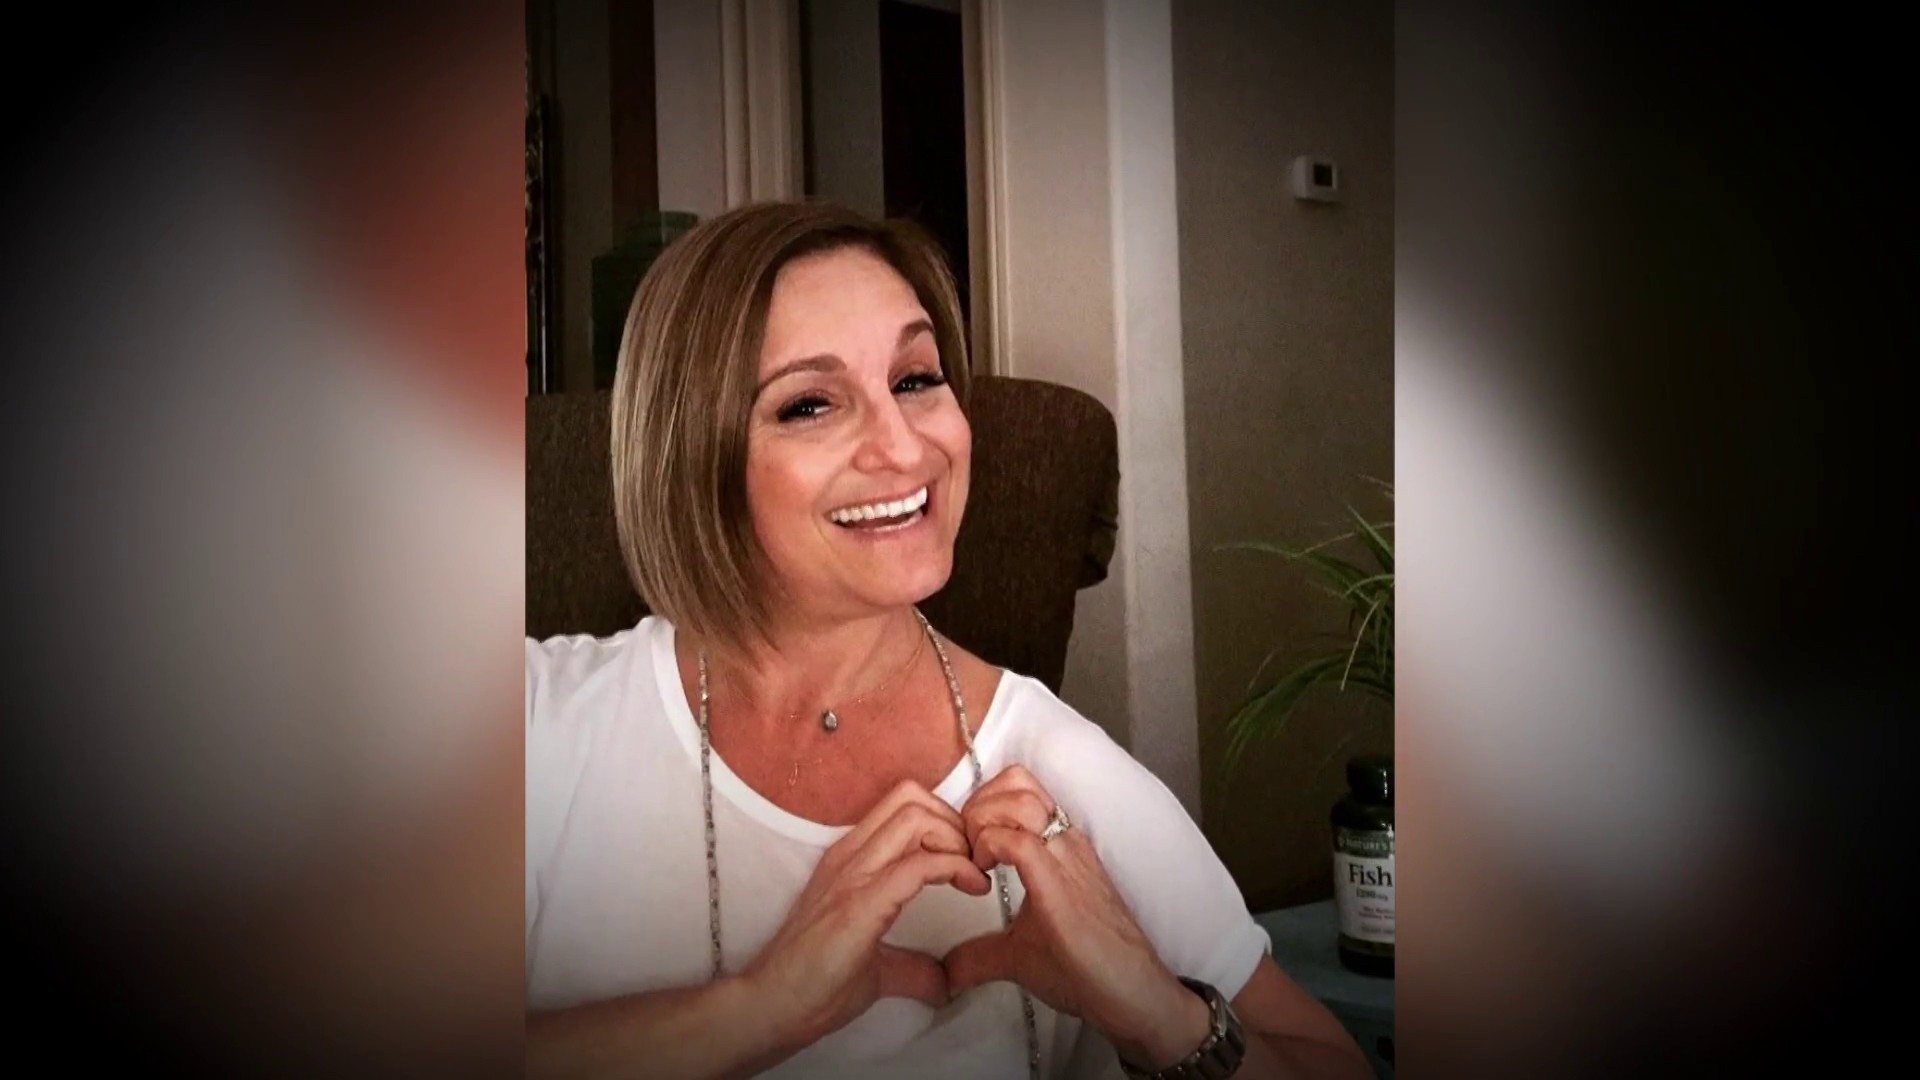 Mary Lou Retton: 'My heart is overflowing with profound gratitude'